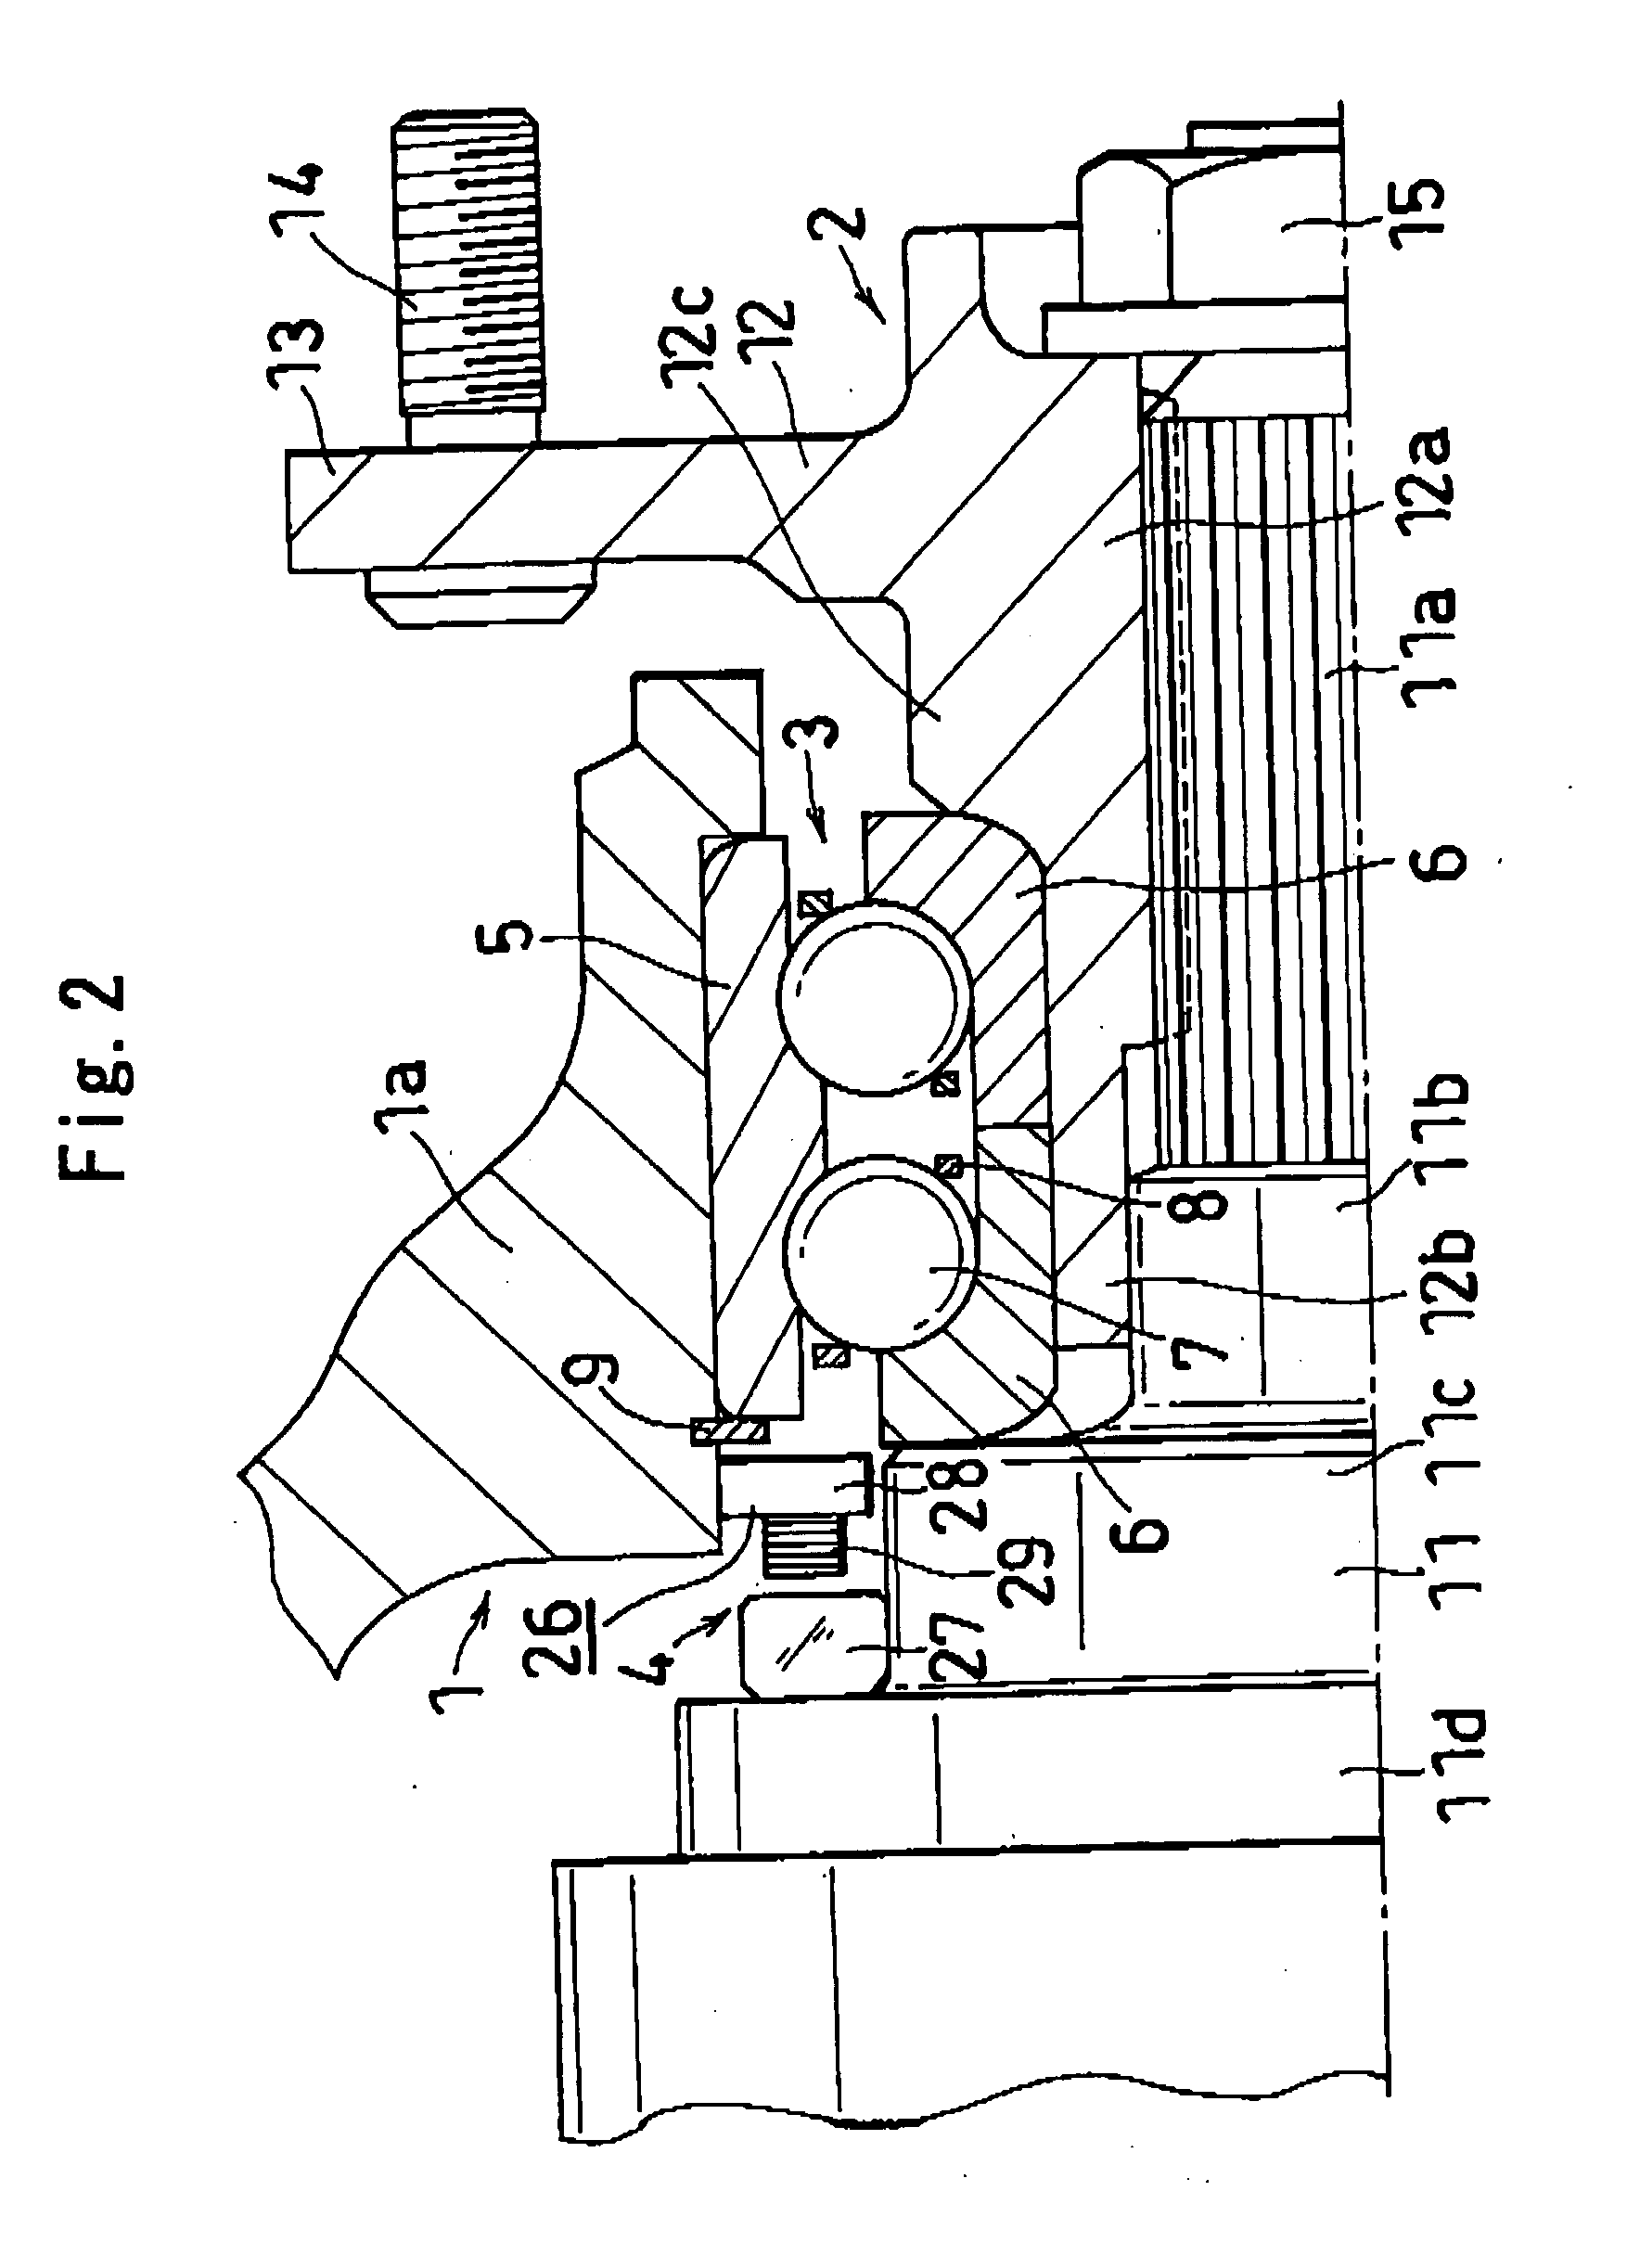 Axle-supporting device